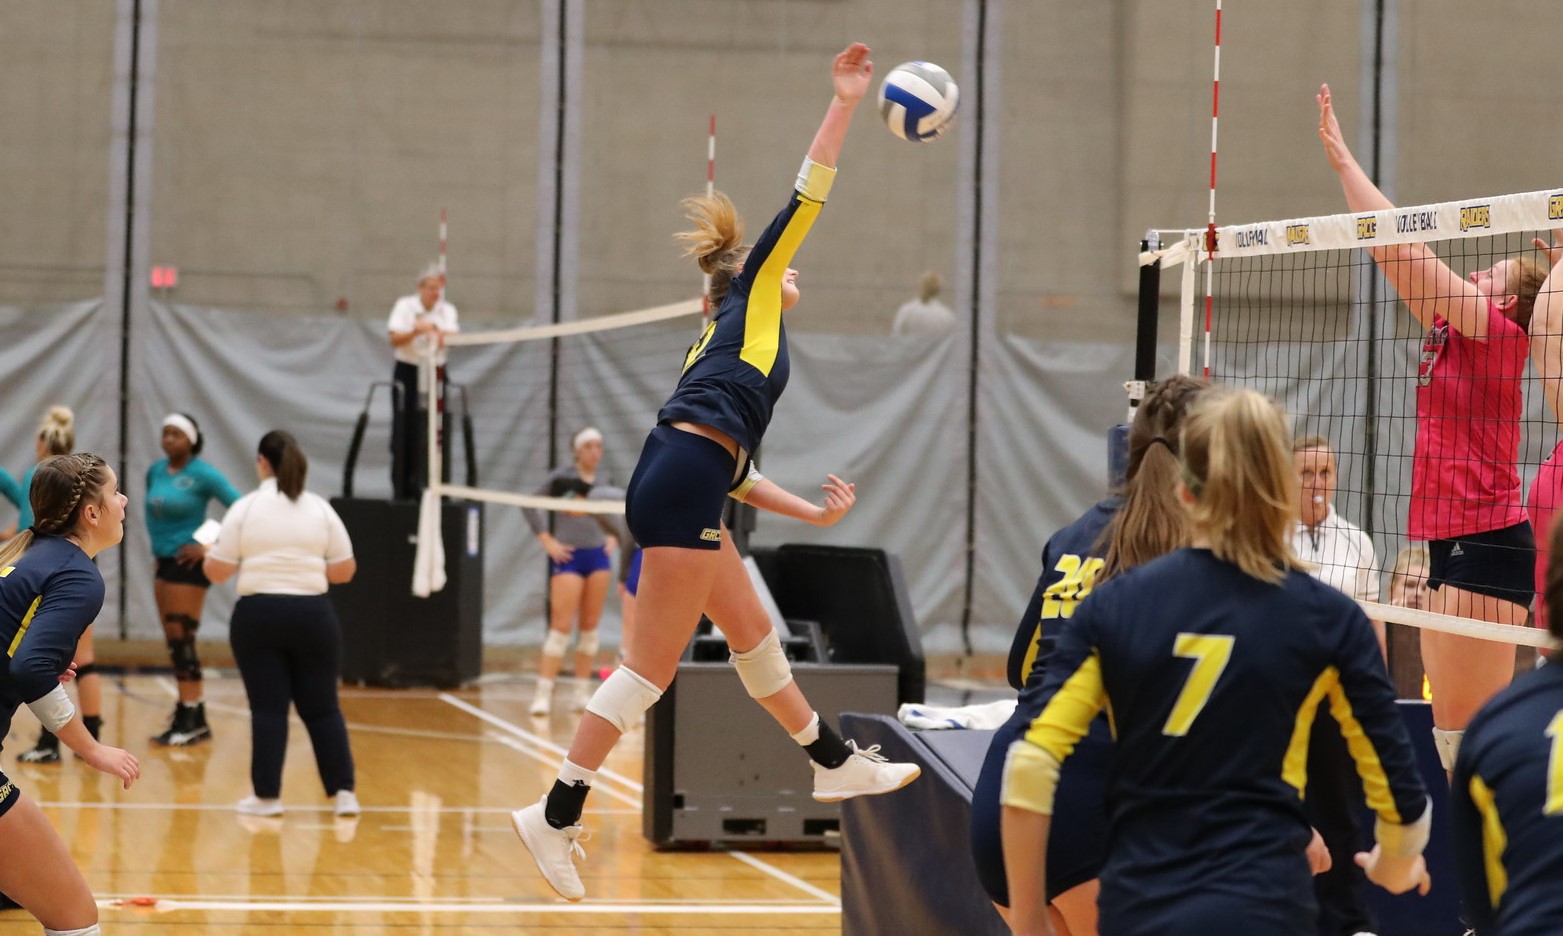 Grand Rapids CC volleyball action shot